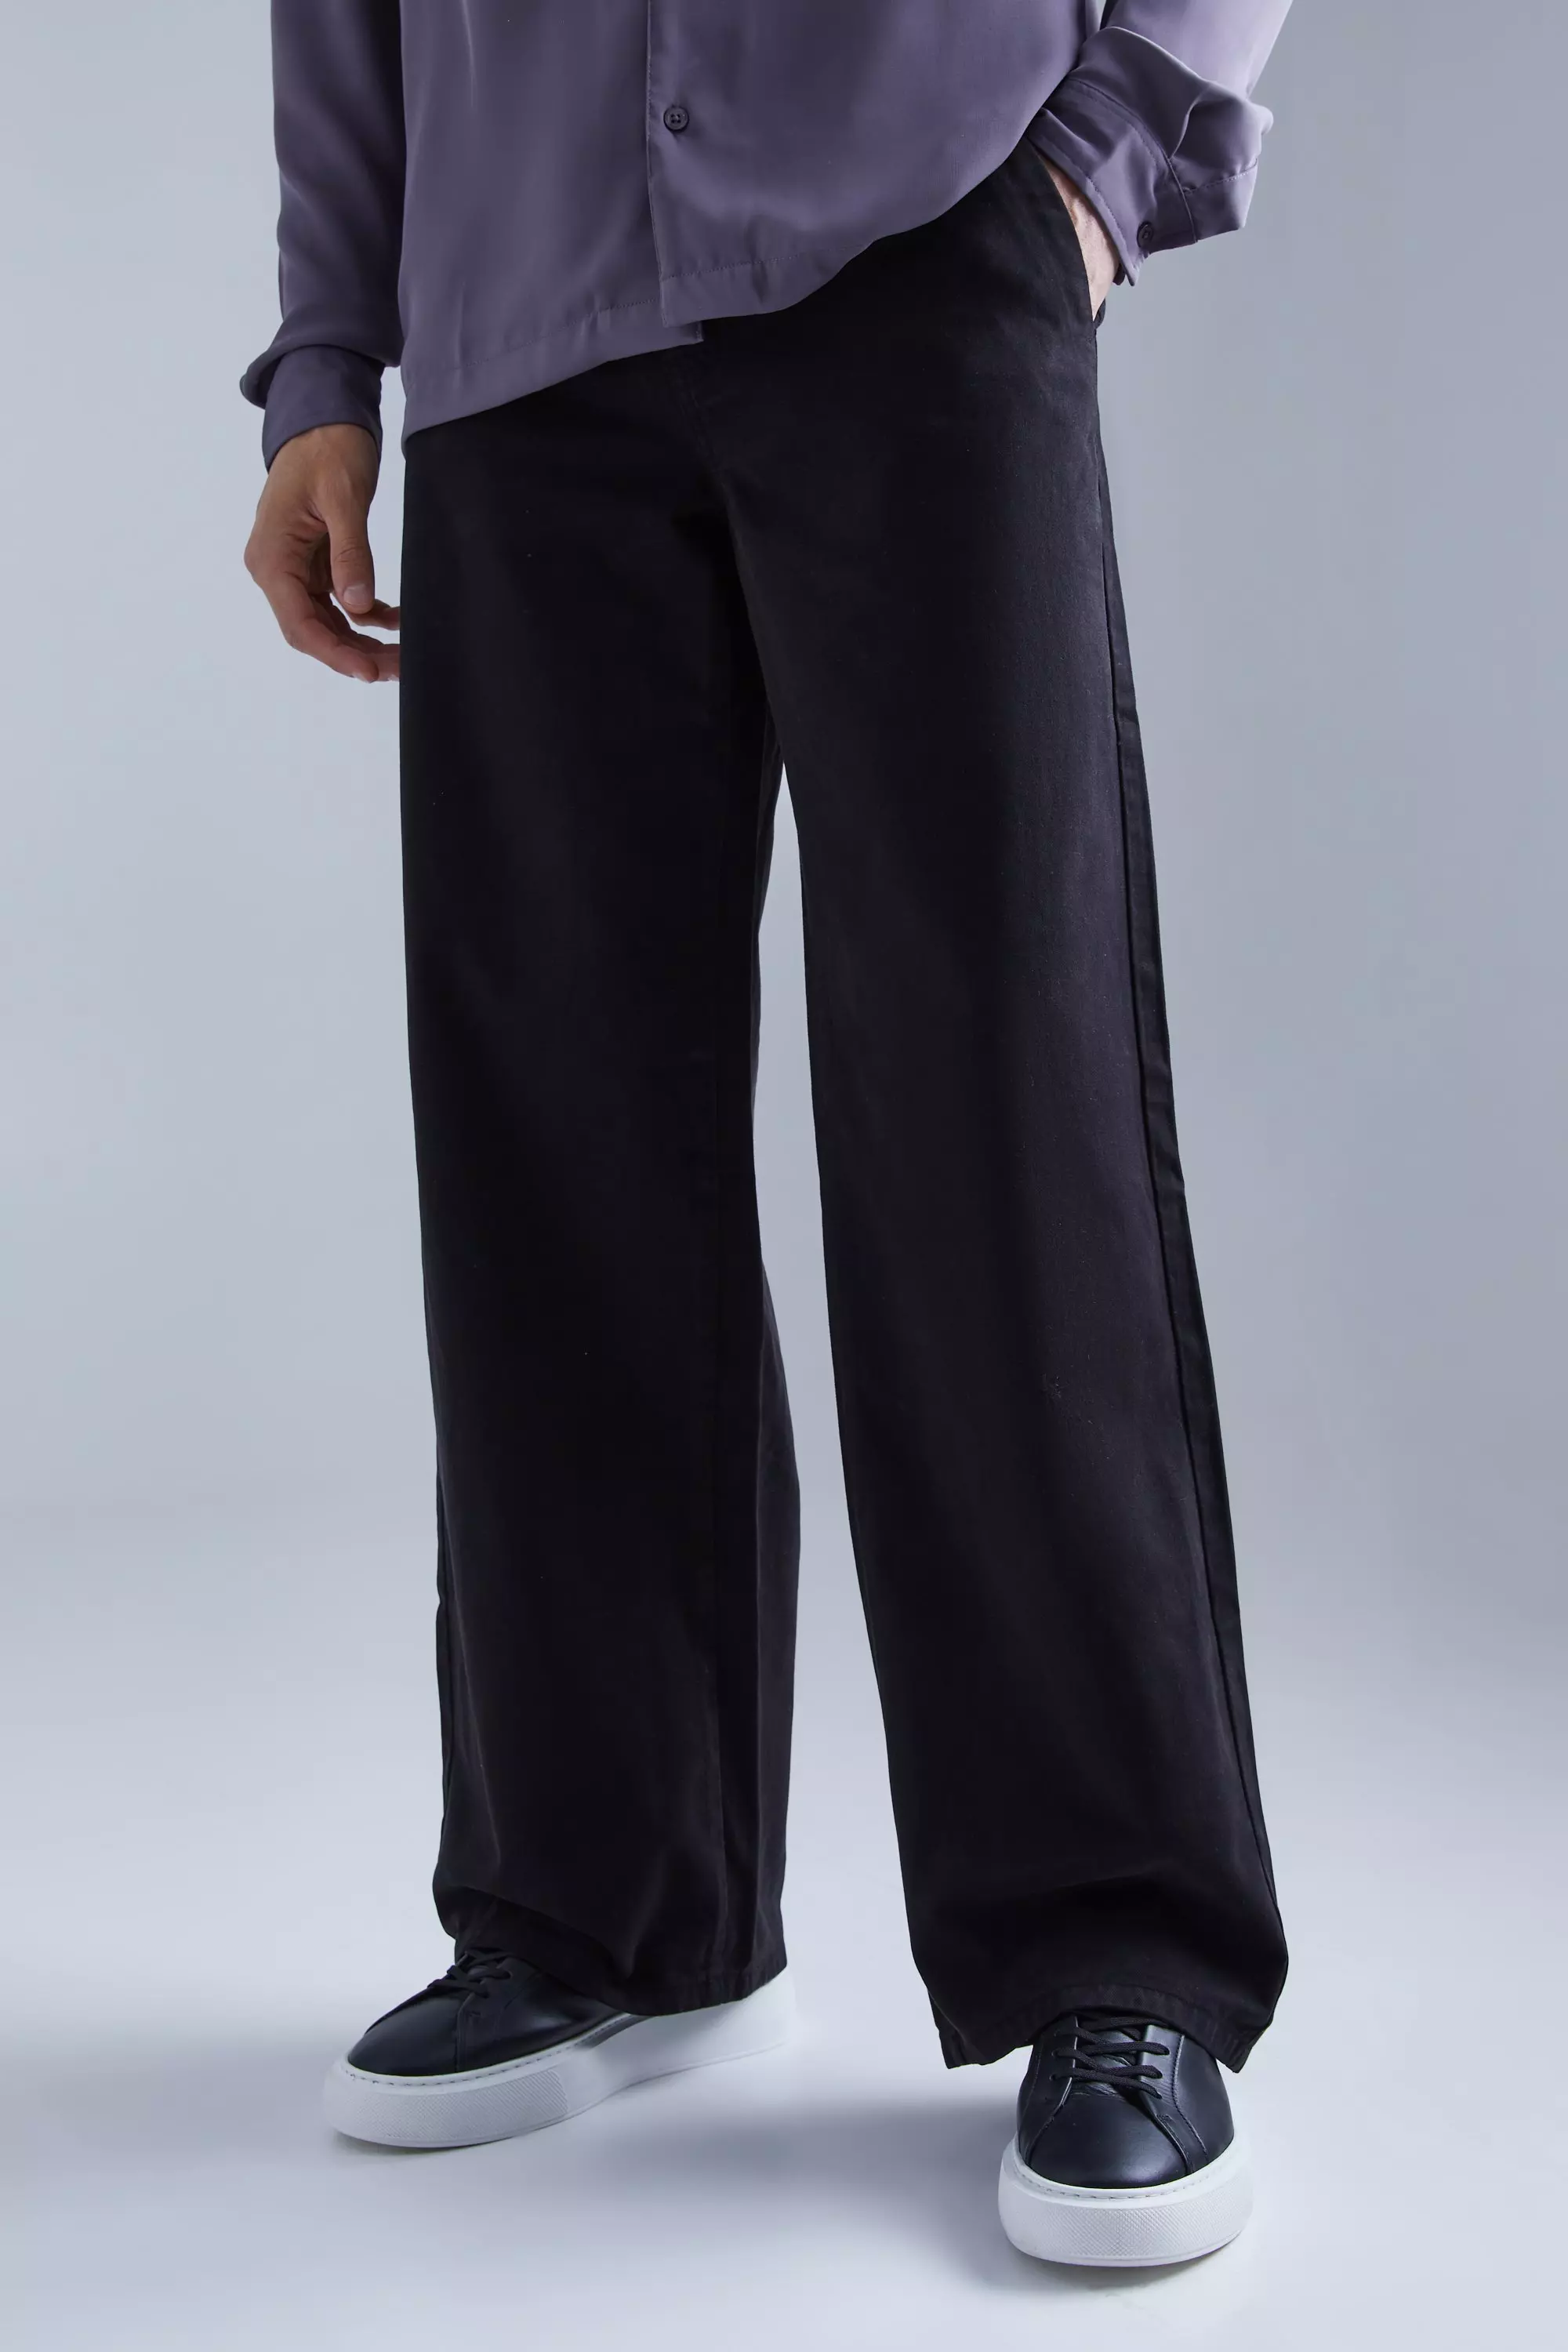 Black Wide Fit Chino Pants